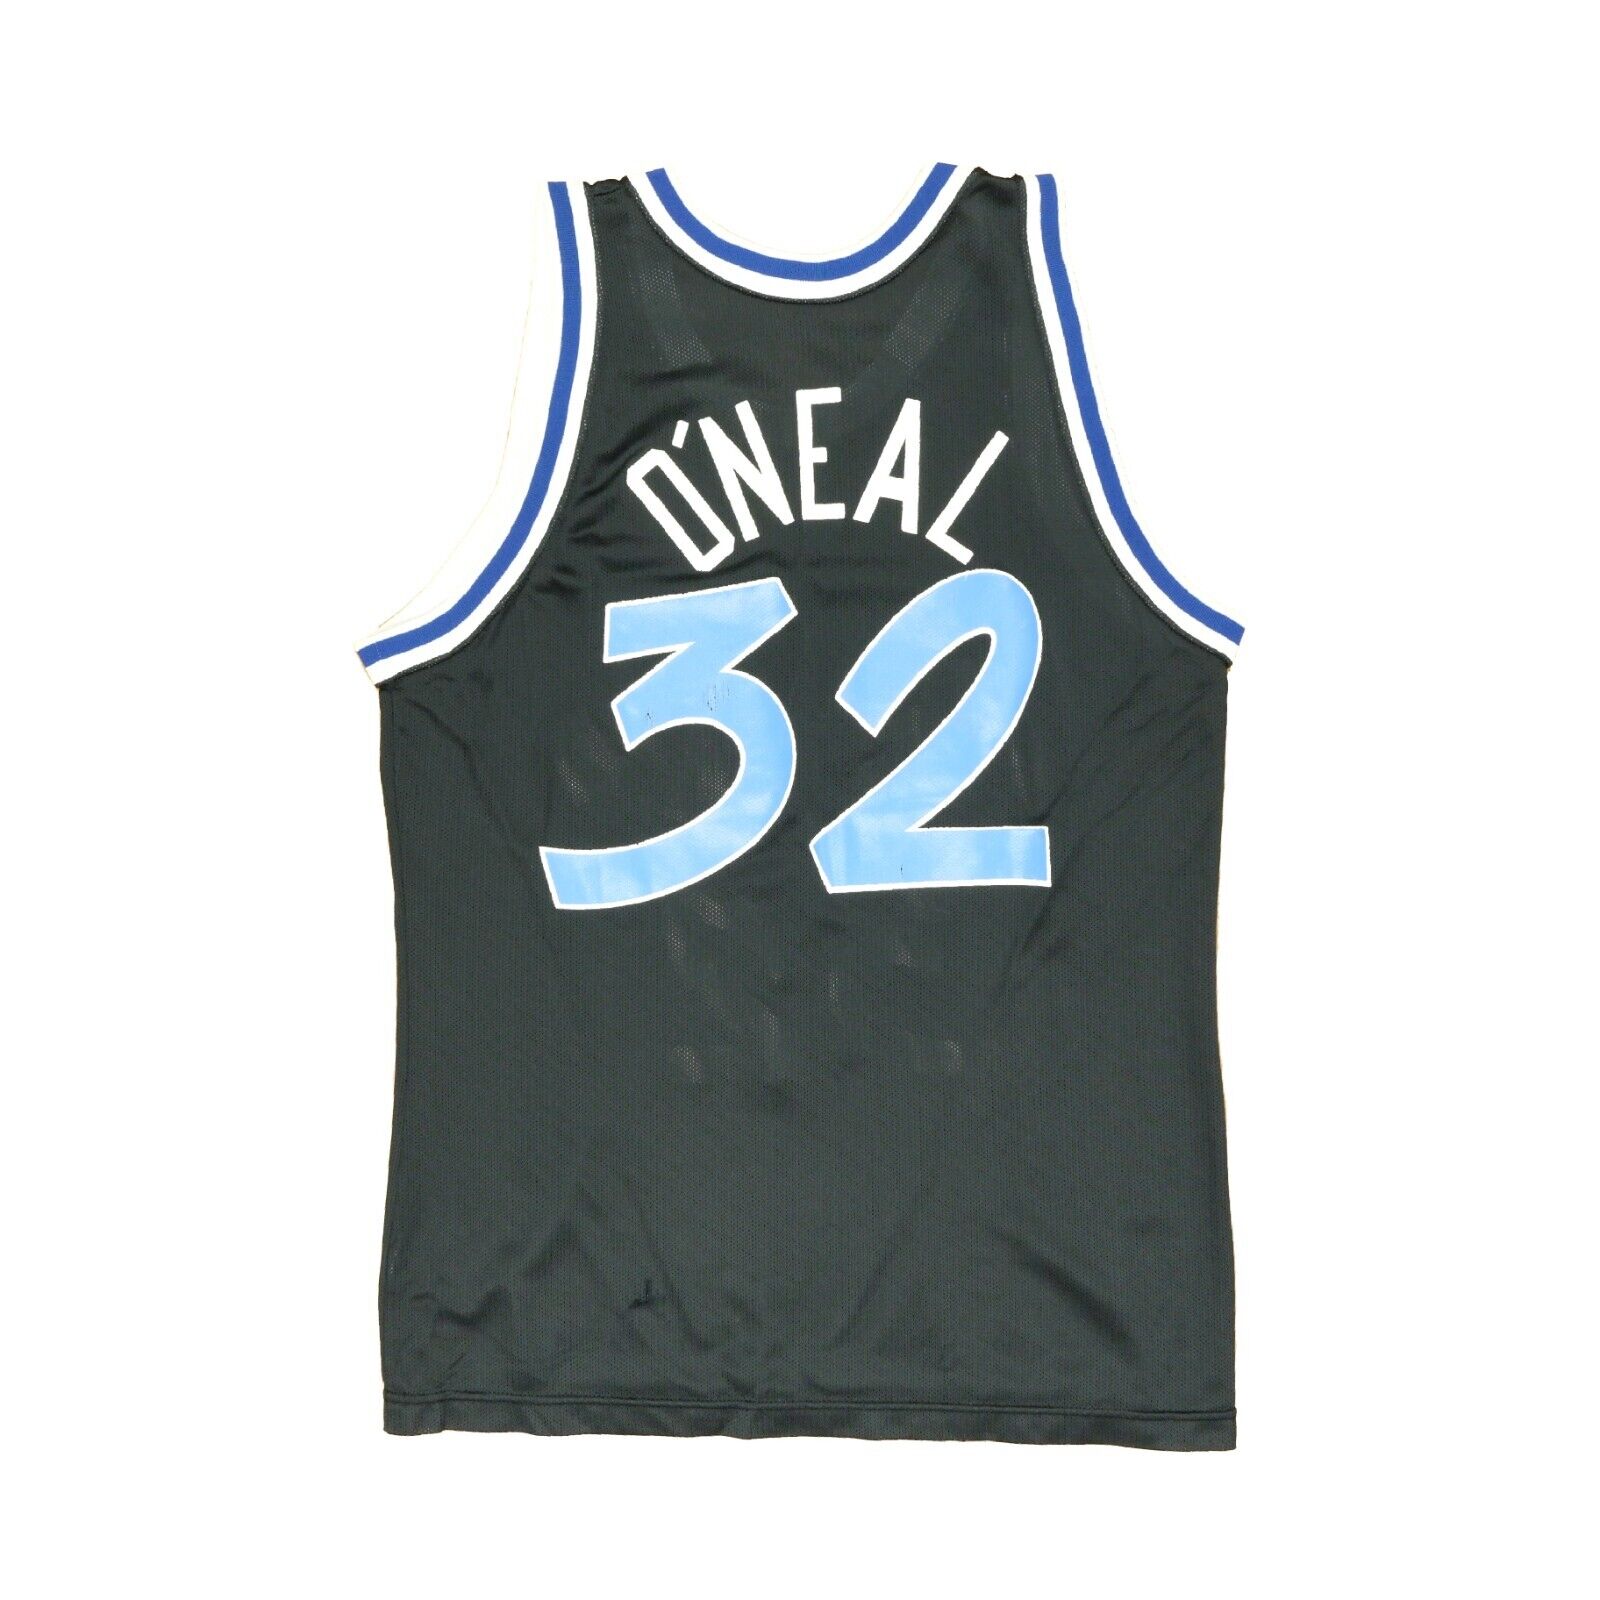 Vintage Orlando Magic Shaquille ONeal Champion Basketball Jersey